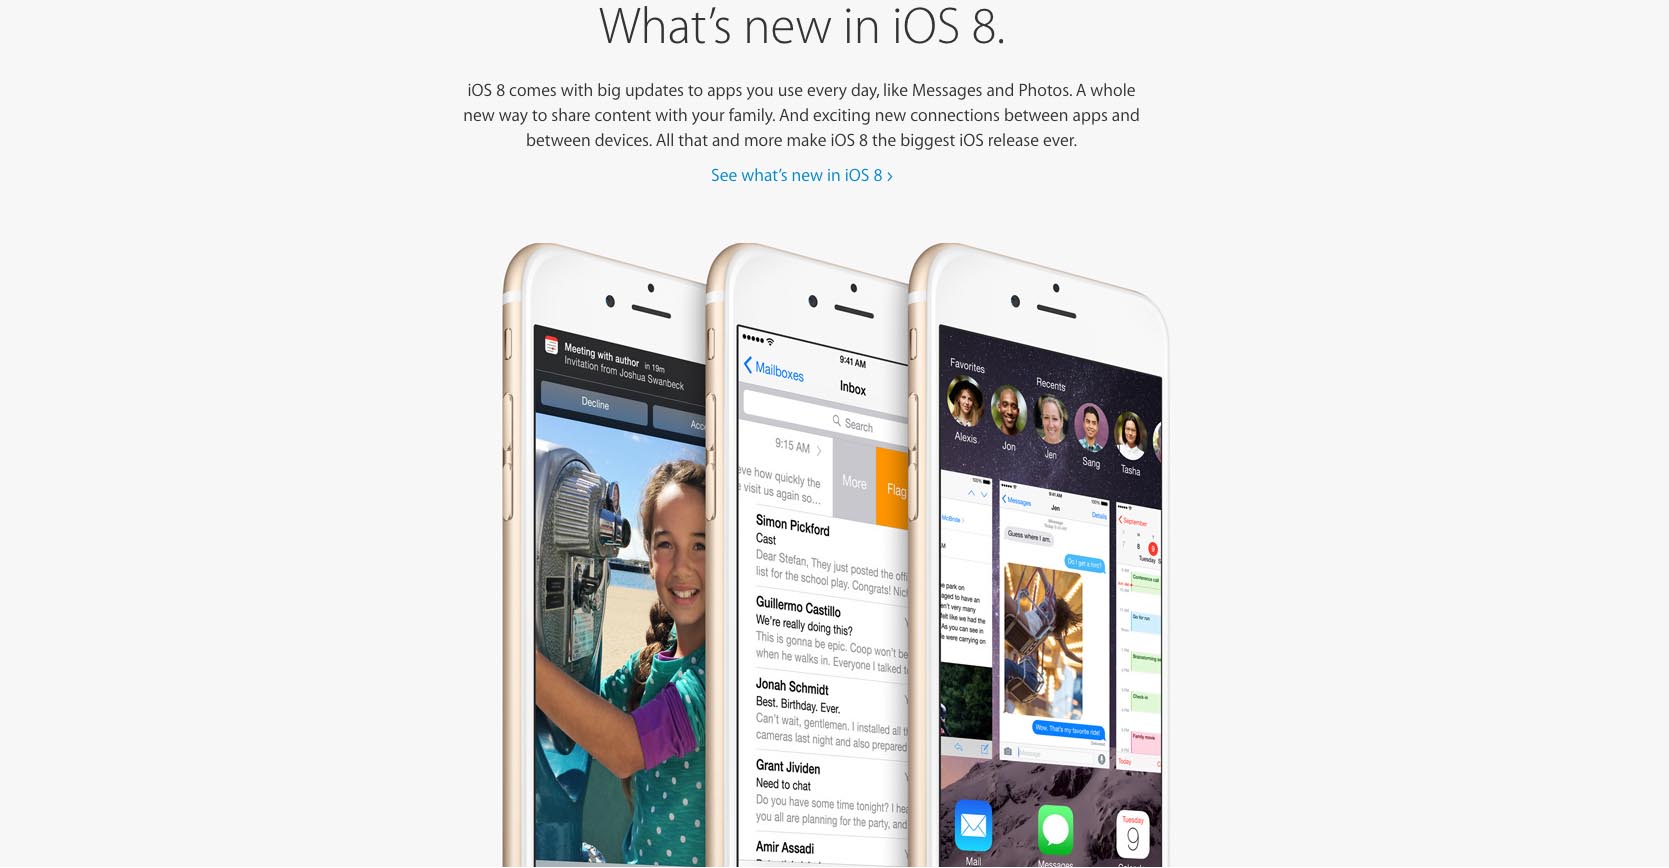 PHOTO: The new Apple iOS 8 is seen in this screen grab from the Apple home page.